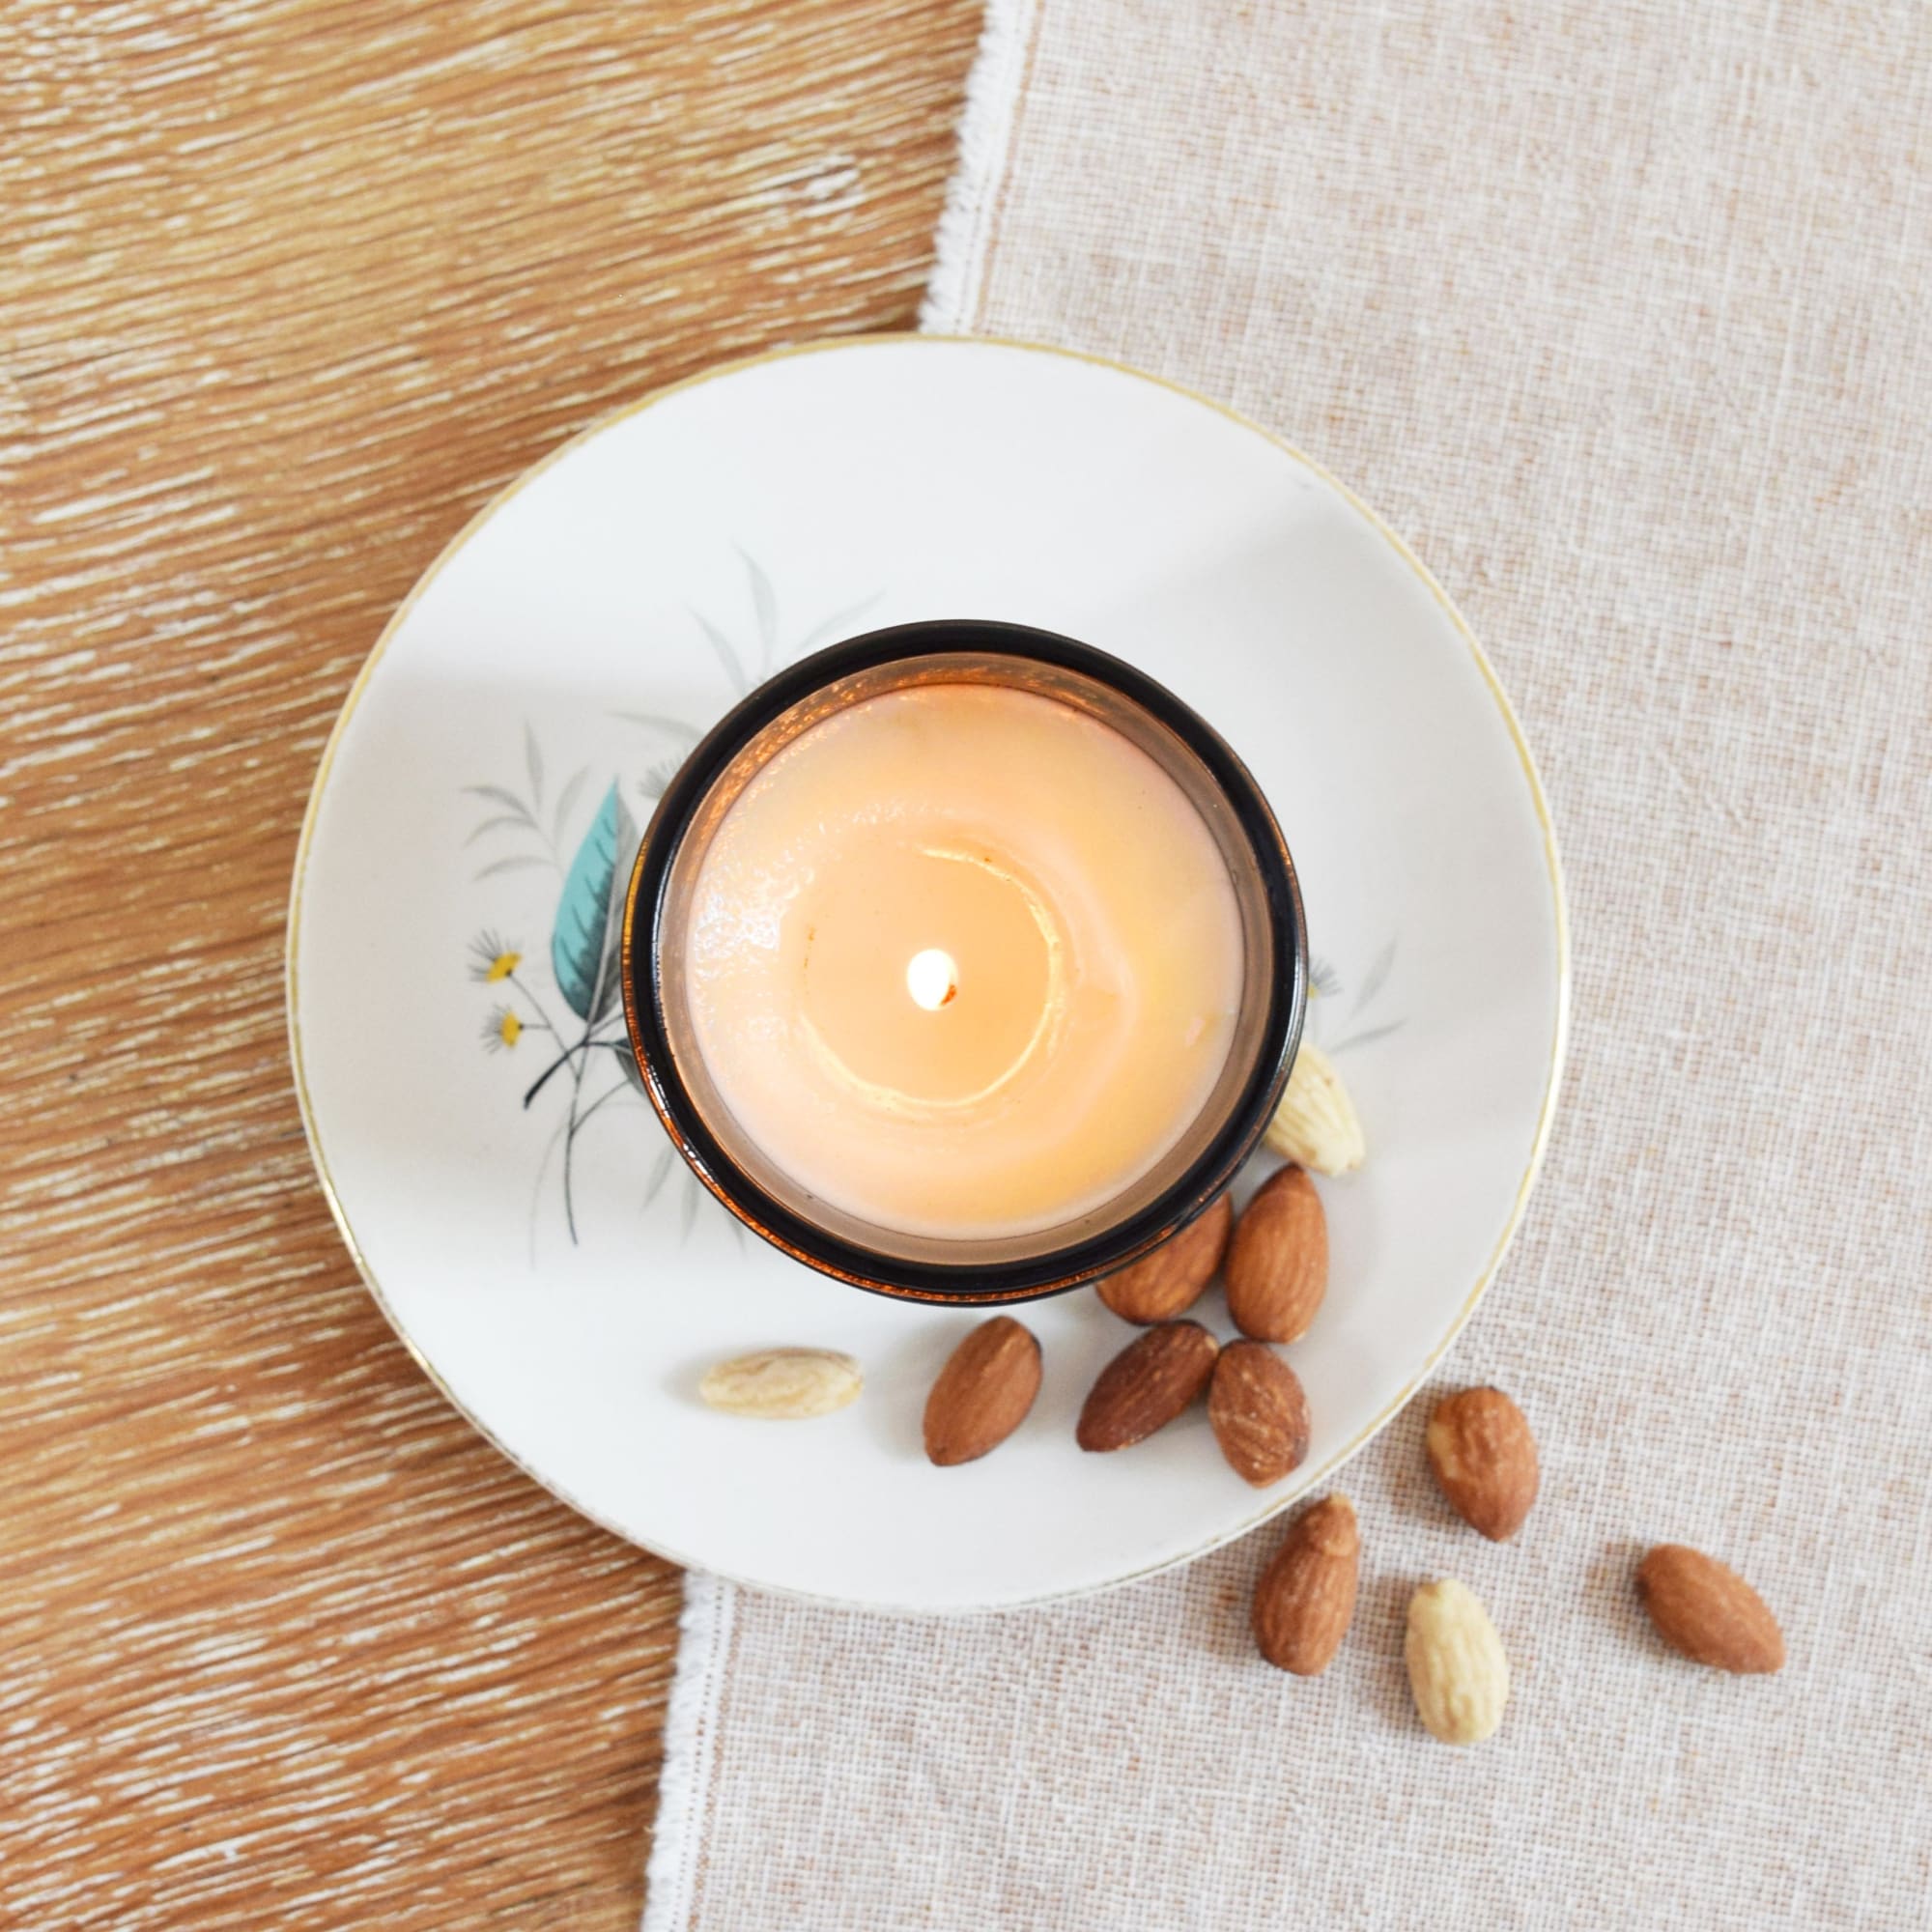 Cardamom Soy Candle | The Baltic Club